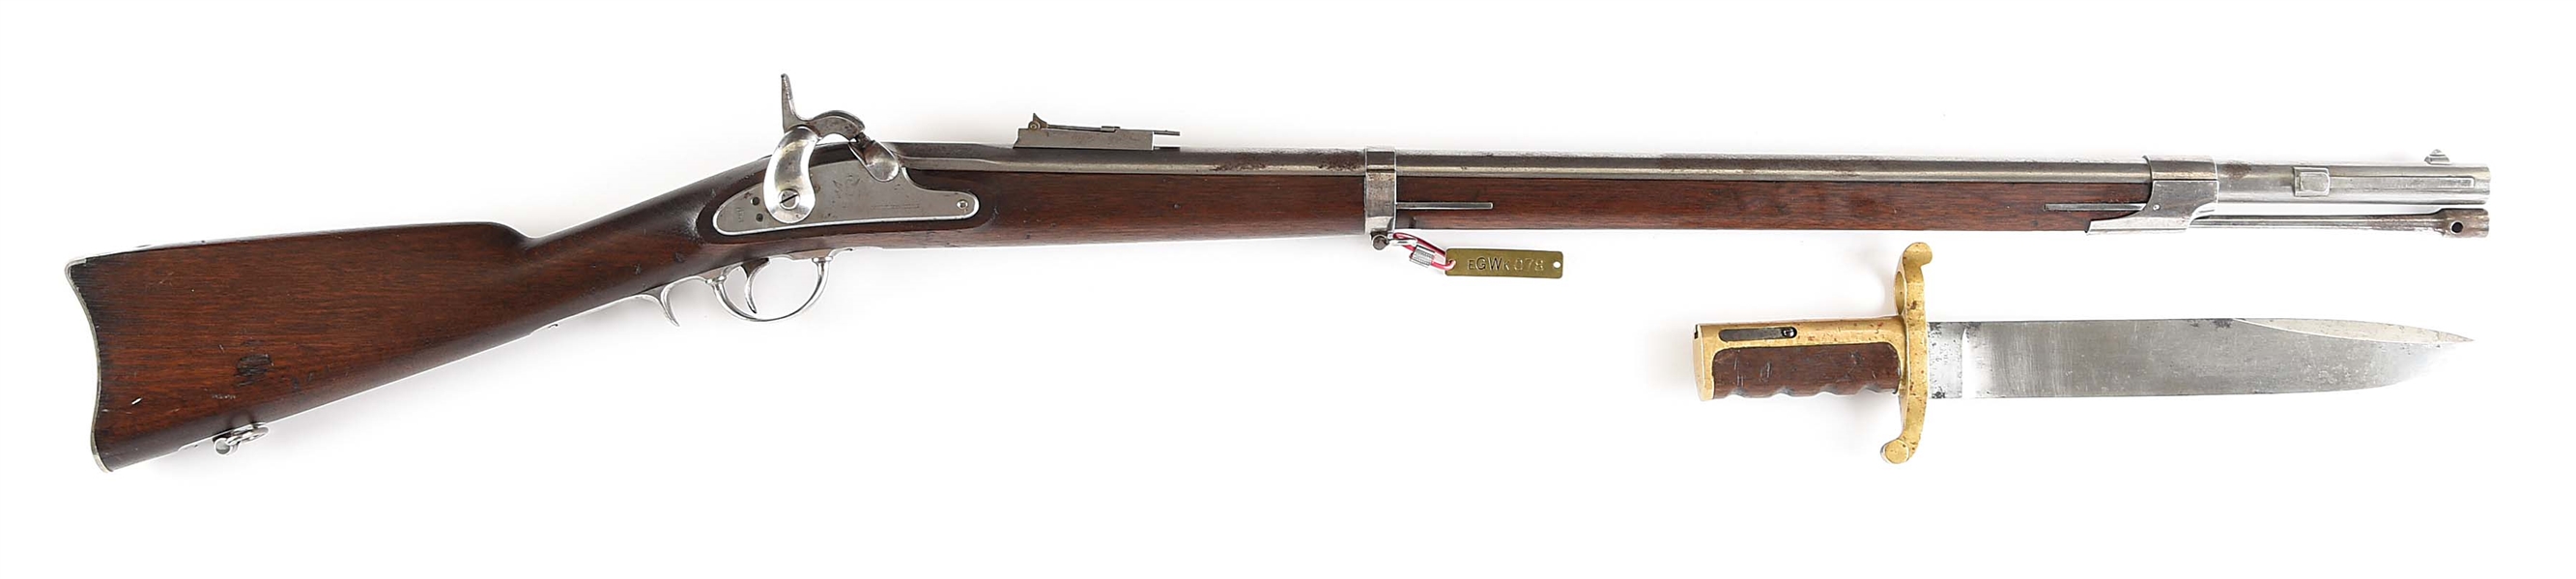 (A) CIVIL WAR WHITNEY MODEL 1861 PLYMOUTH NAVY RIFLE, DATED 1863 WITH DAHLGREN BOWIE BAYONET.